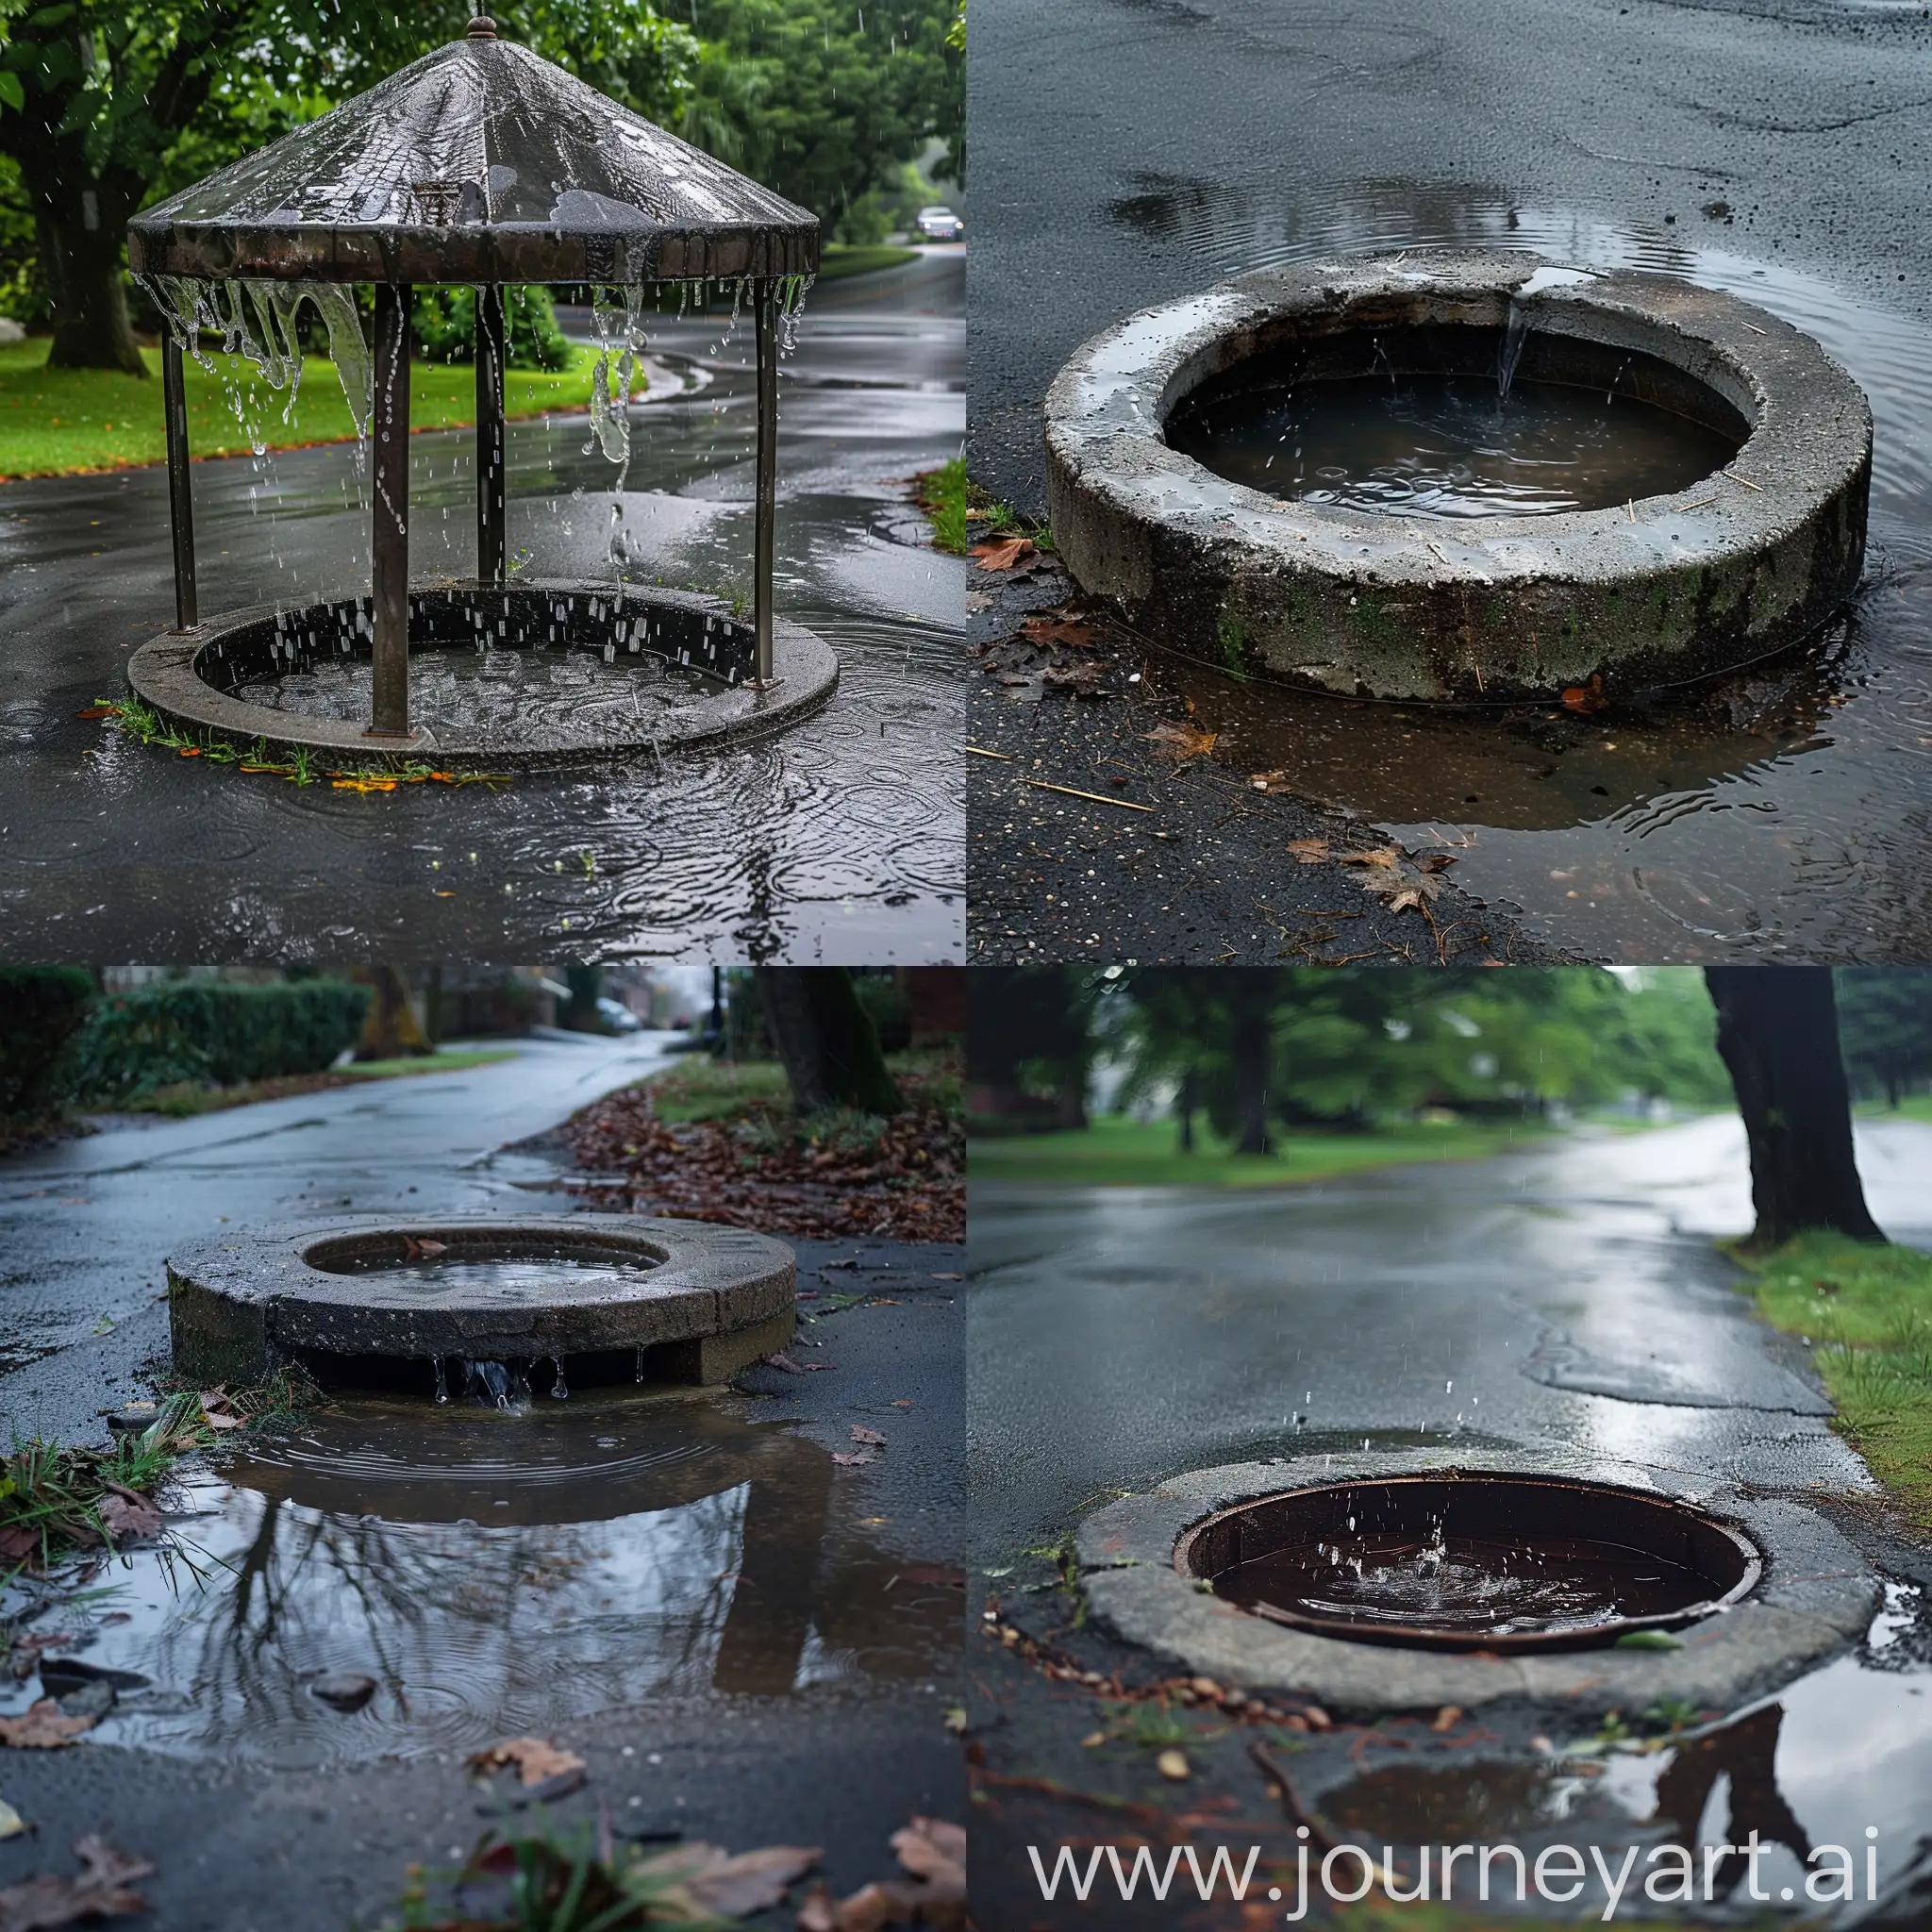 Rainy-Day-Well-Heavy-Rain-and-Water-Flowing-into-the-Well